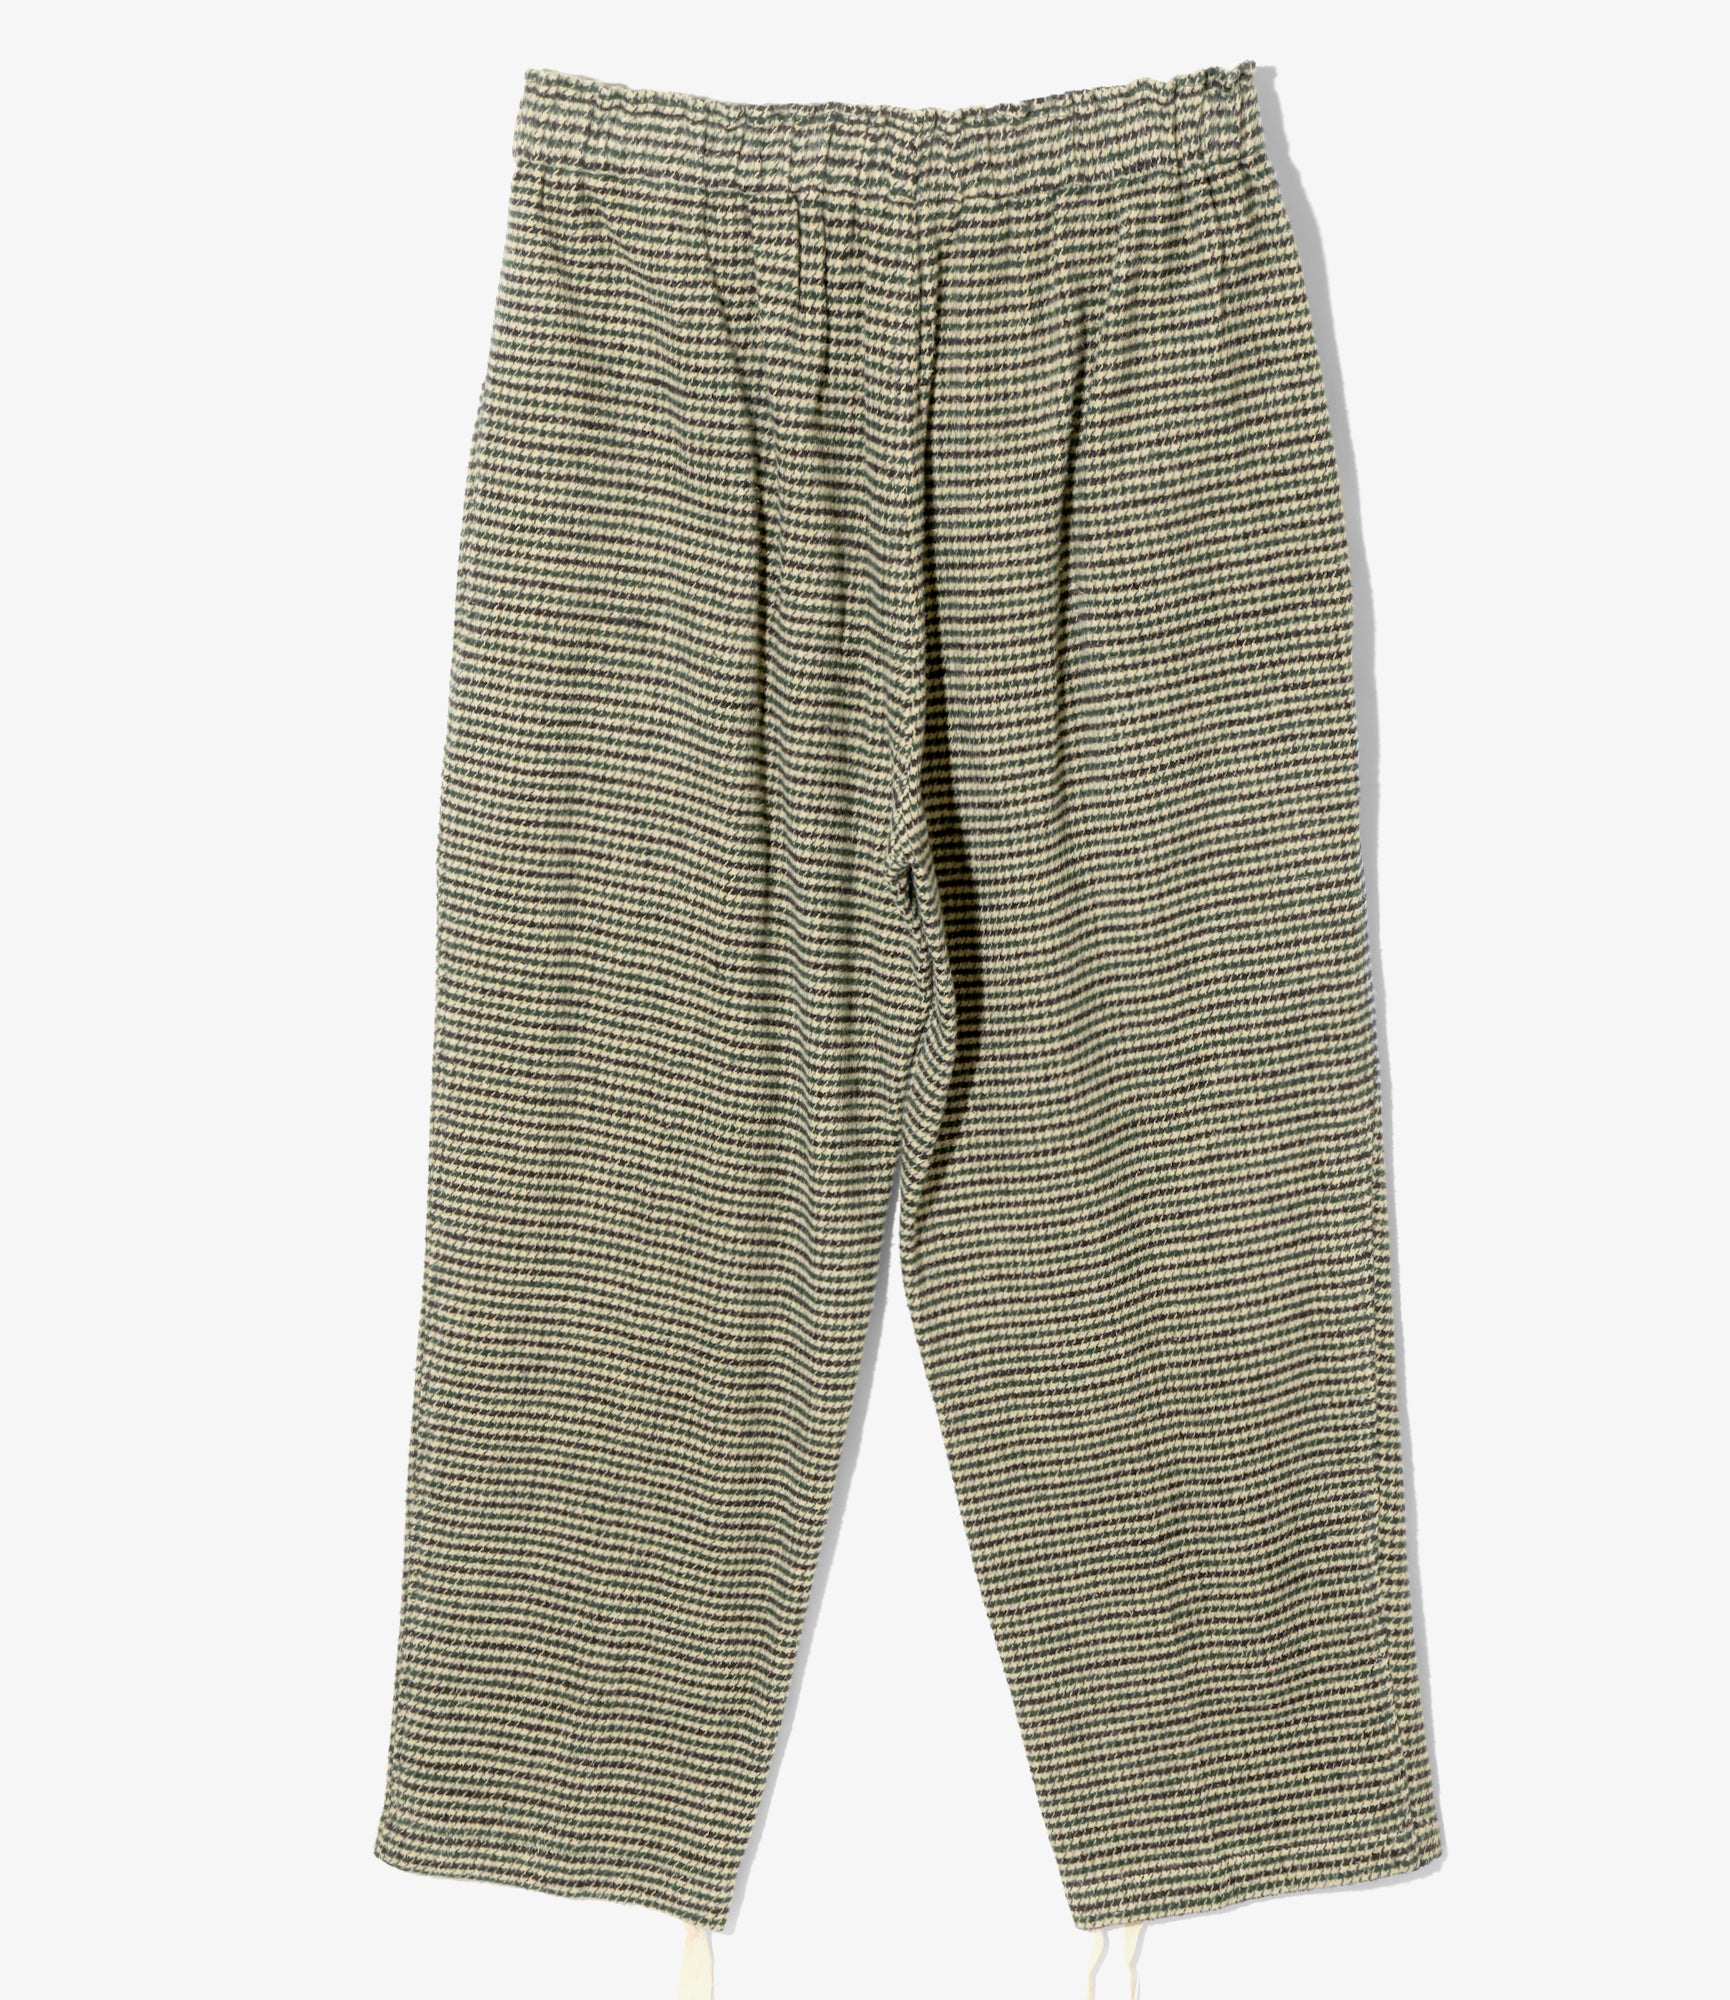 South2 West8 Army String Pant - Cotton Flannel / Houndstooth - Grn/Beg/Blk